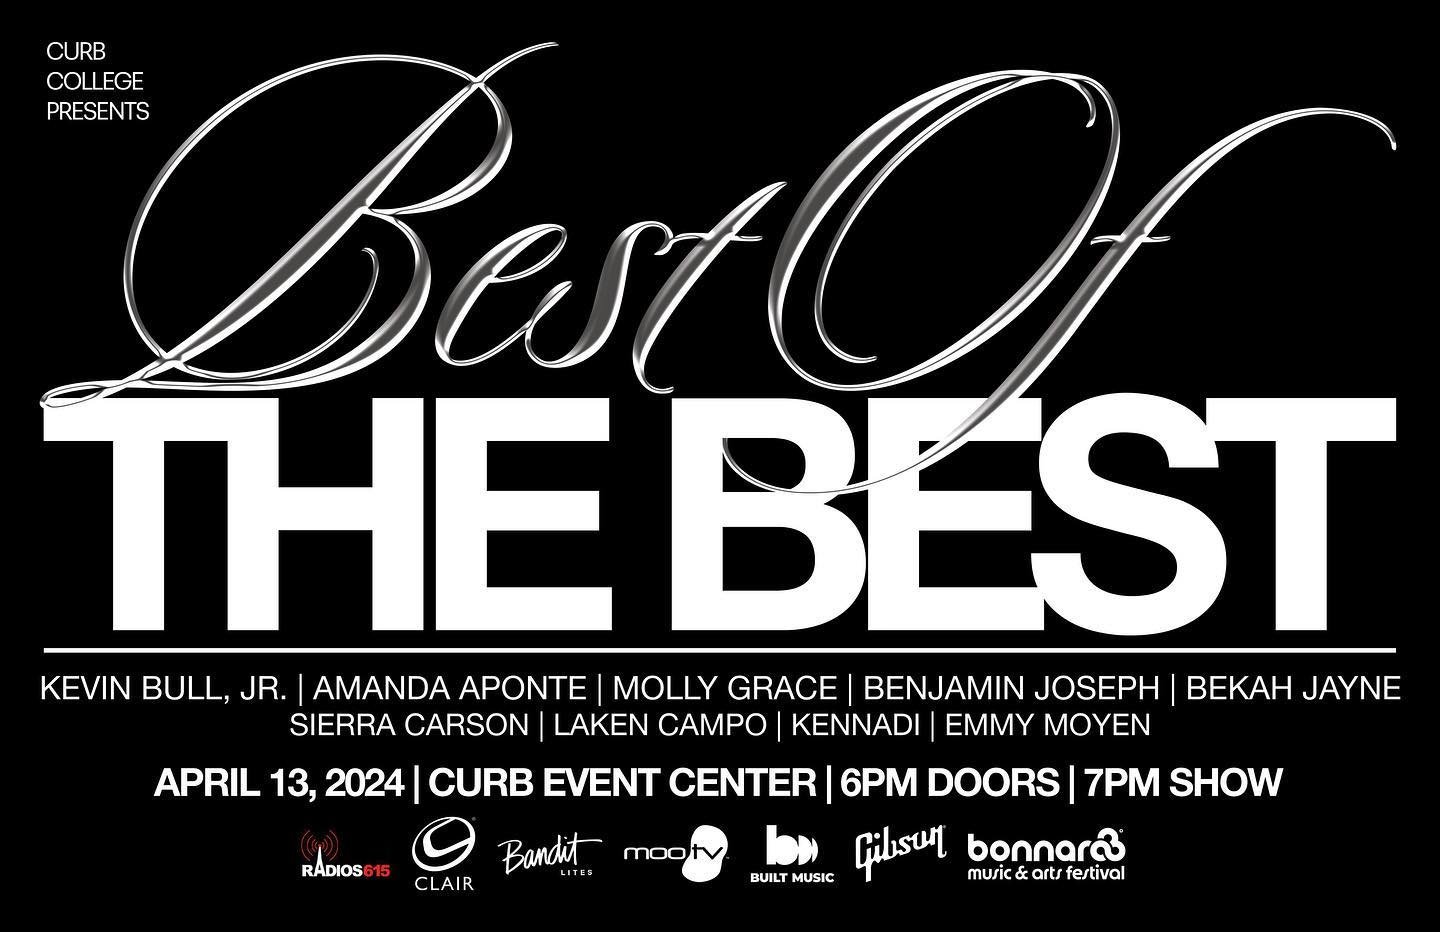 Best of the Best is tomorrow @ 7 pm in the Curb Event Center.🎸🎶